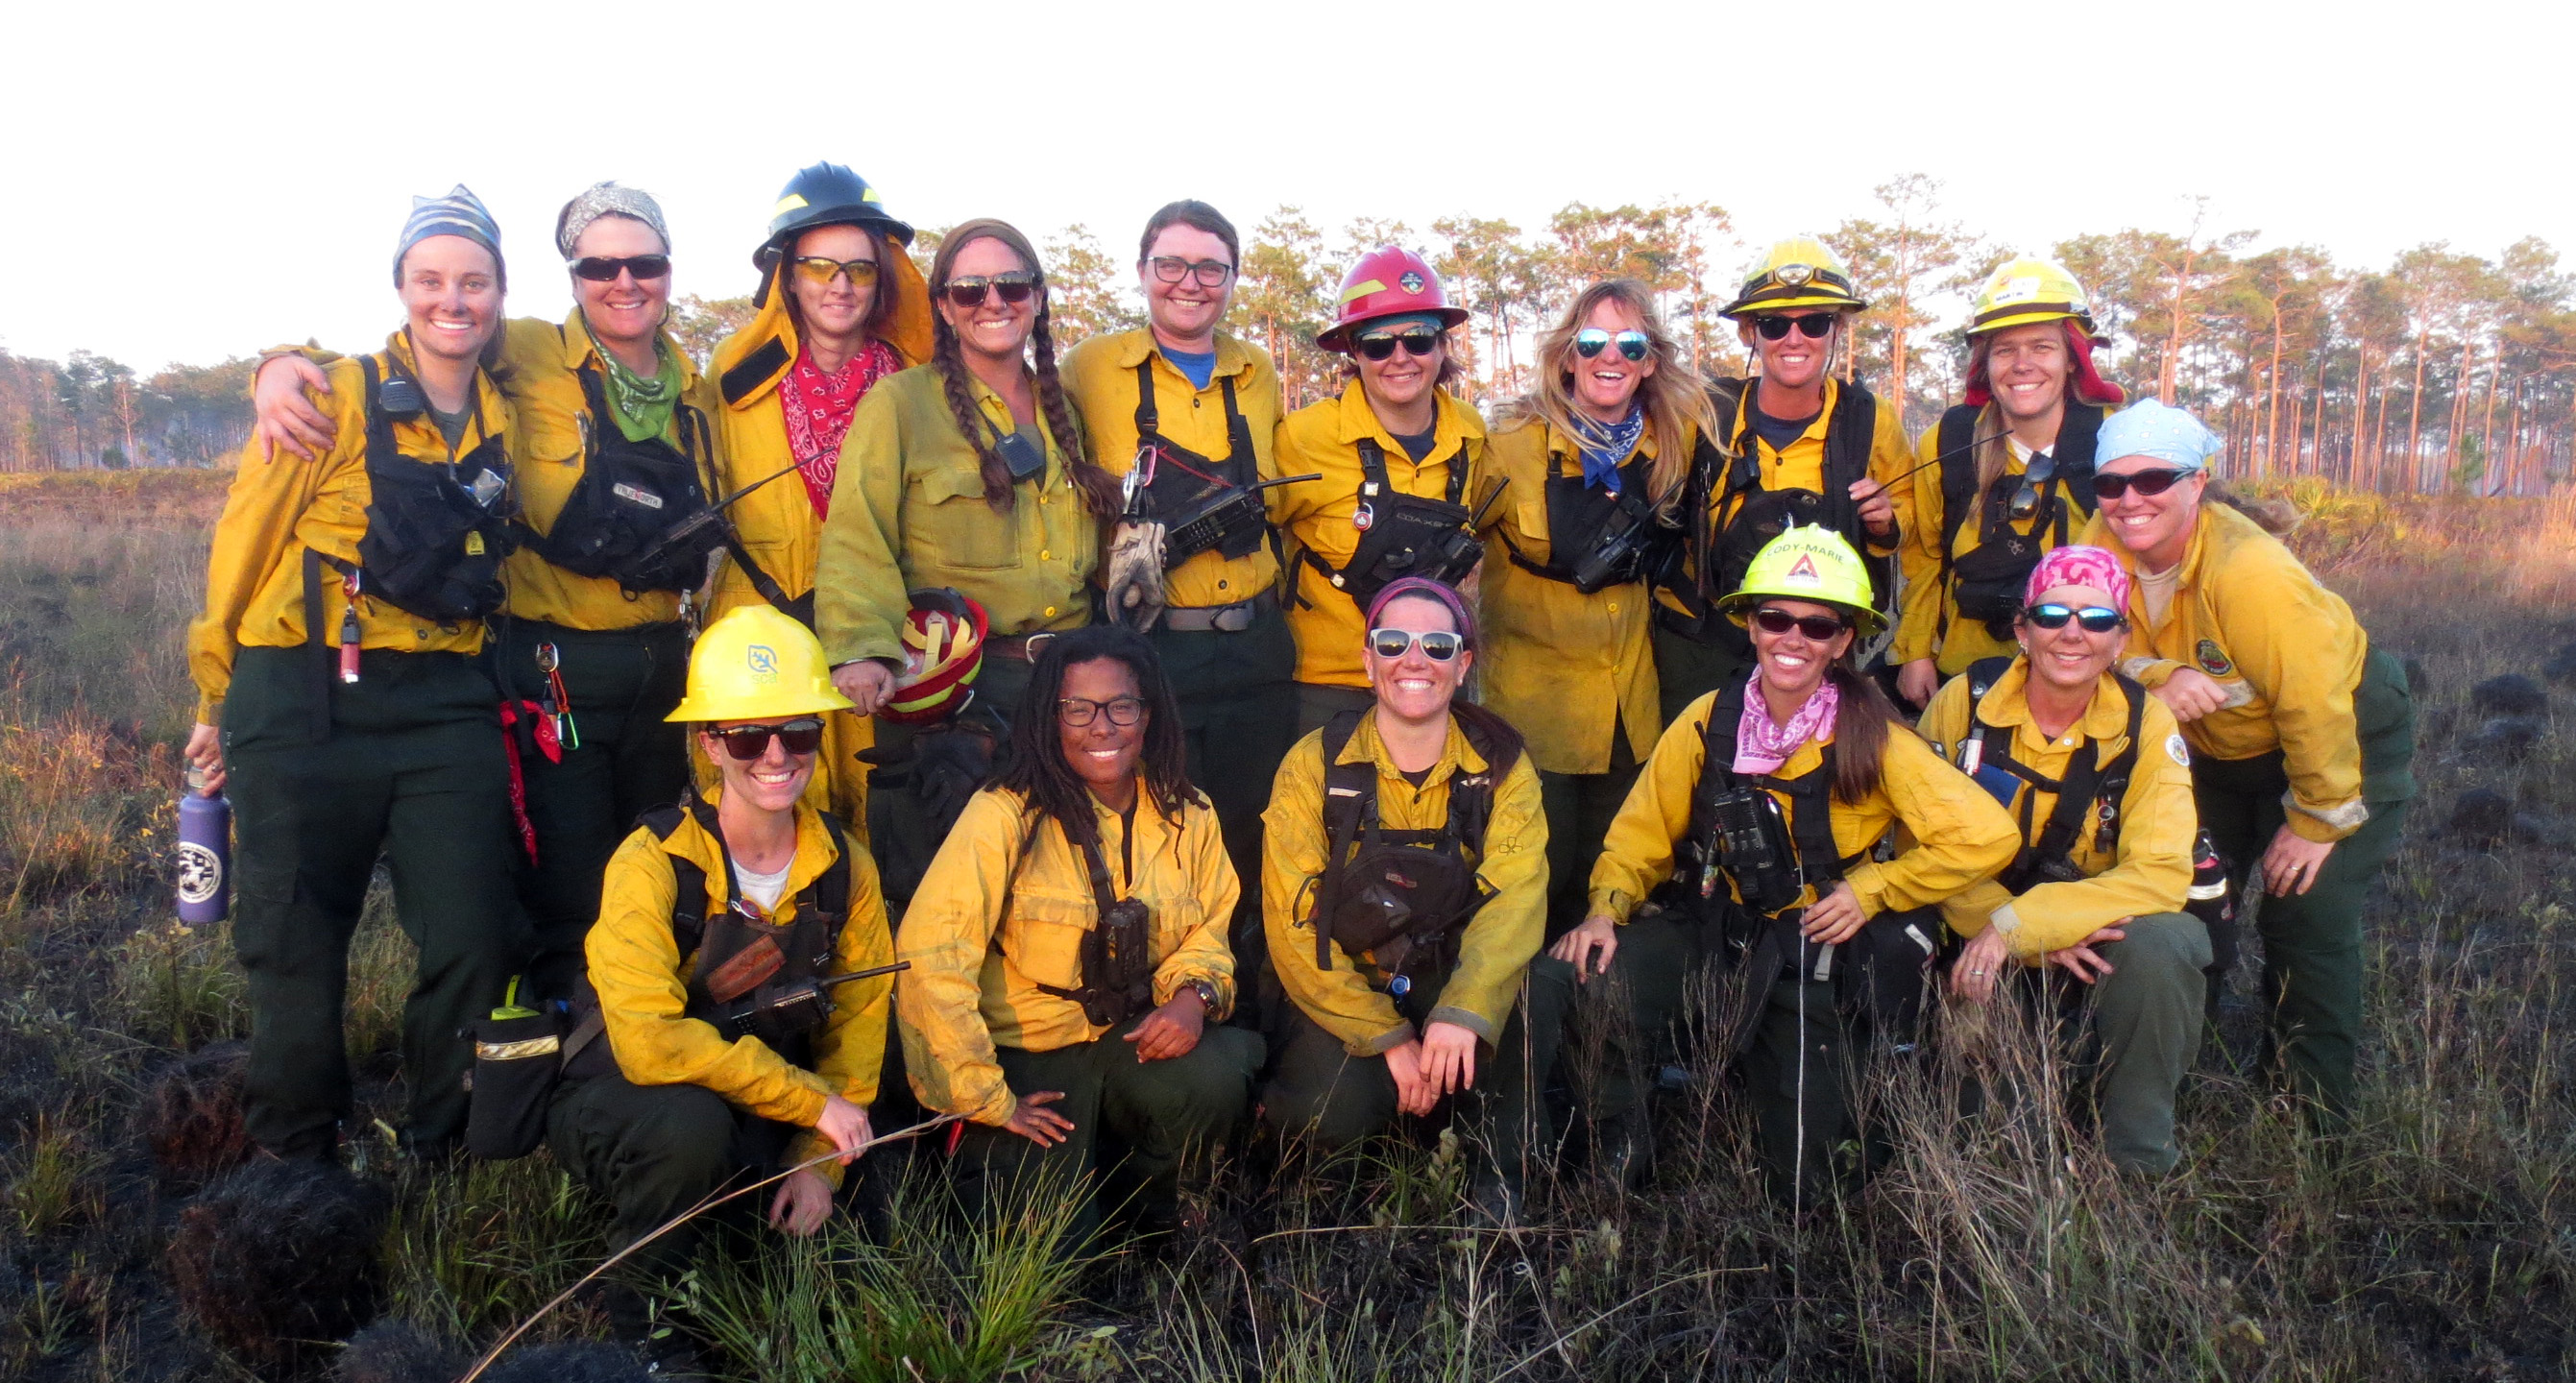 A group photo of 14 female fire-workers at an all-female controlled burn in Florida.